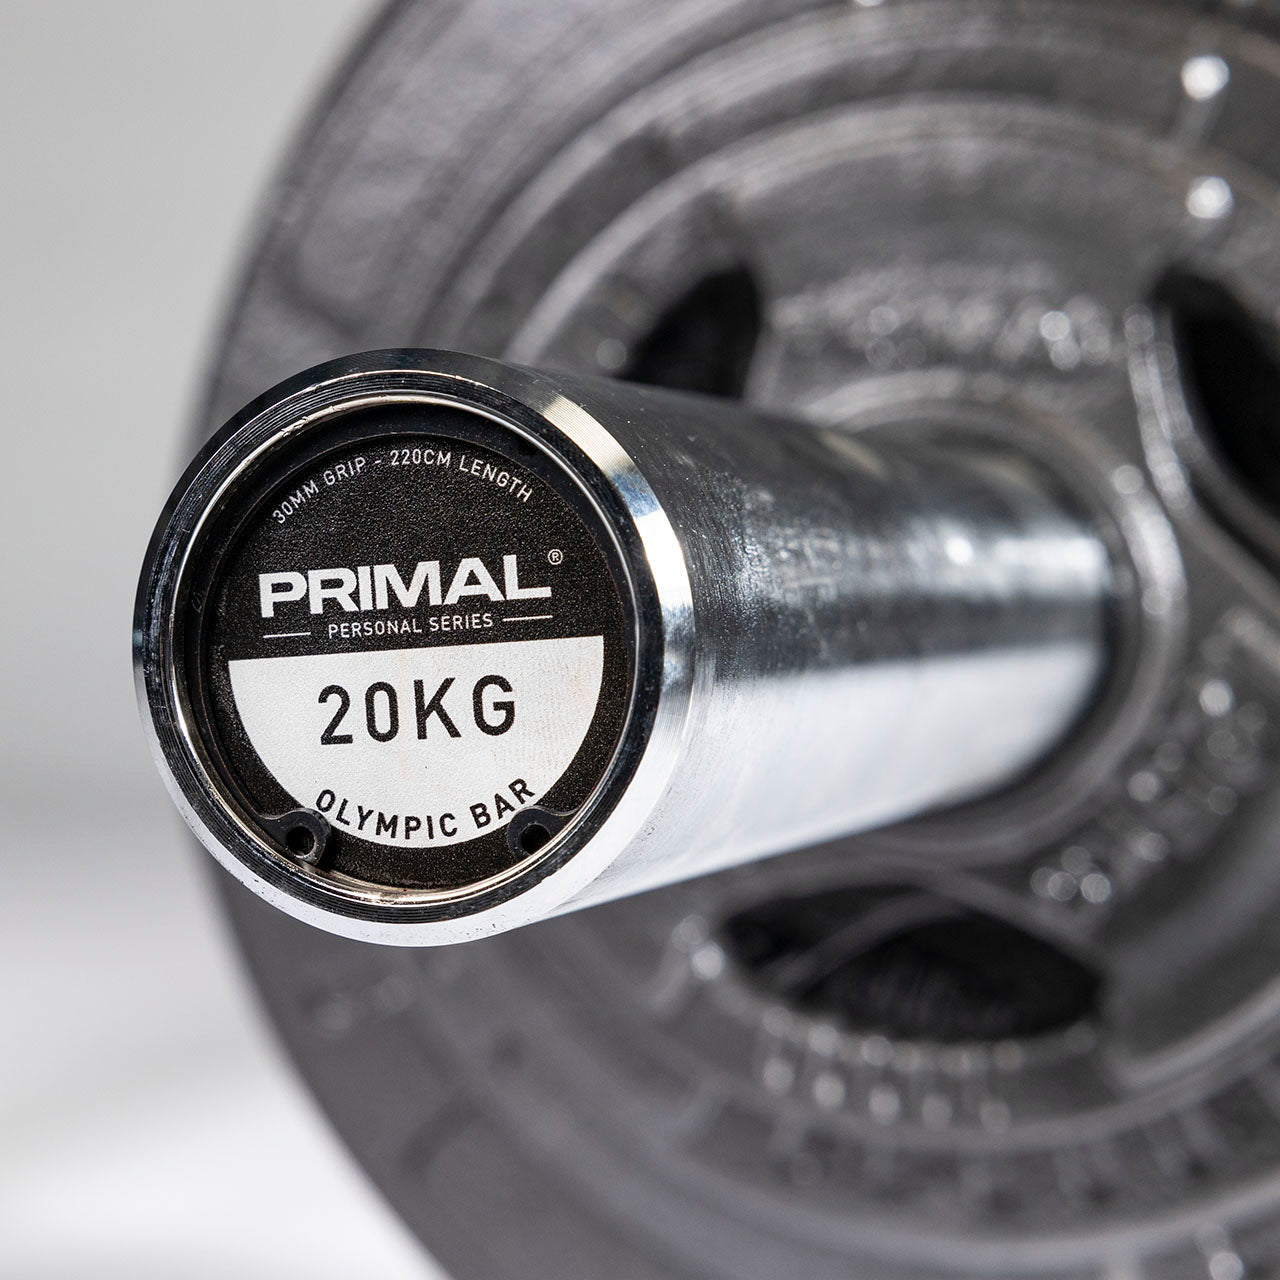 Primal Personal Series 100kg Cast Iron Olympic Weight Kit